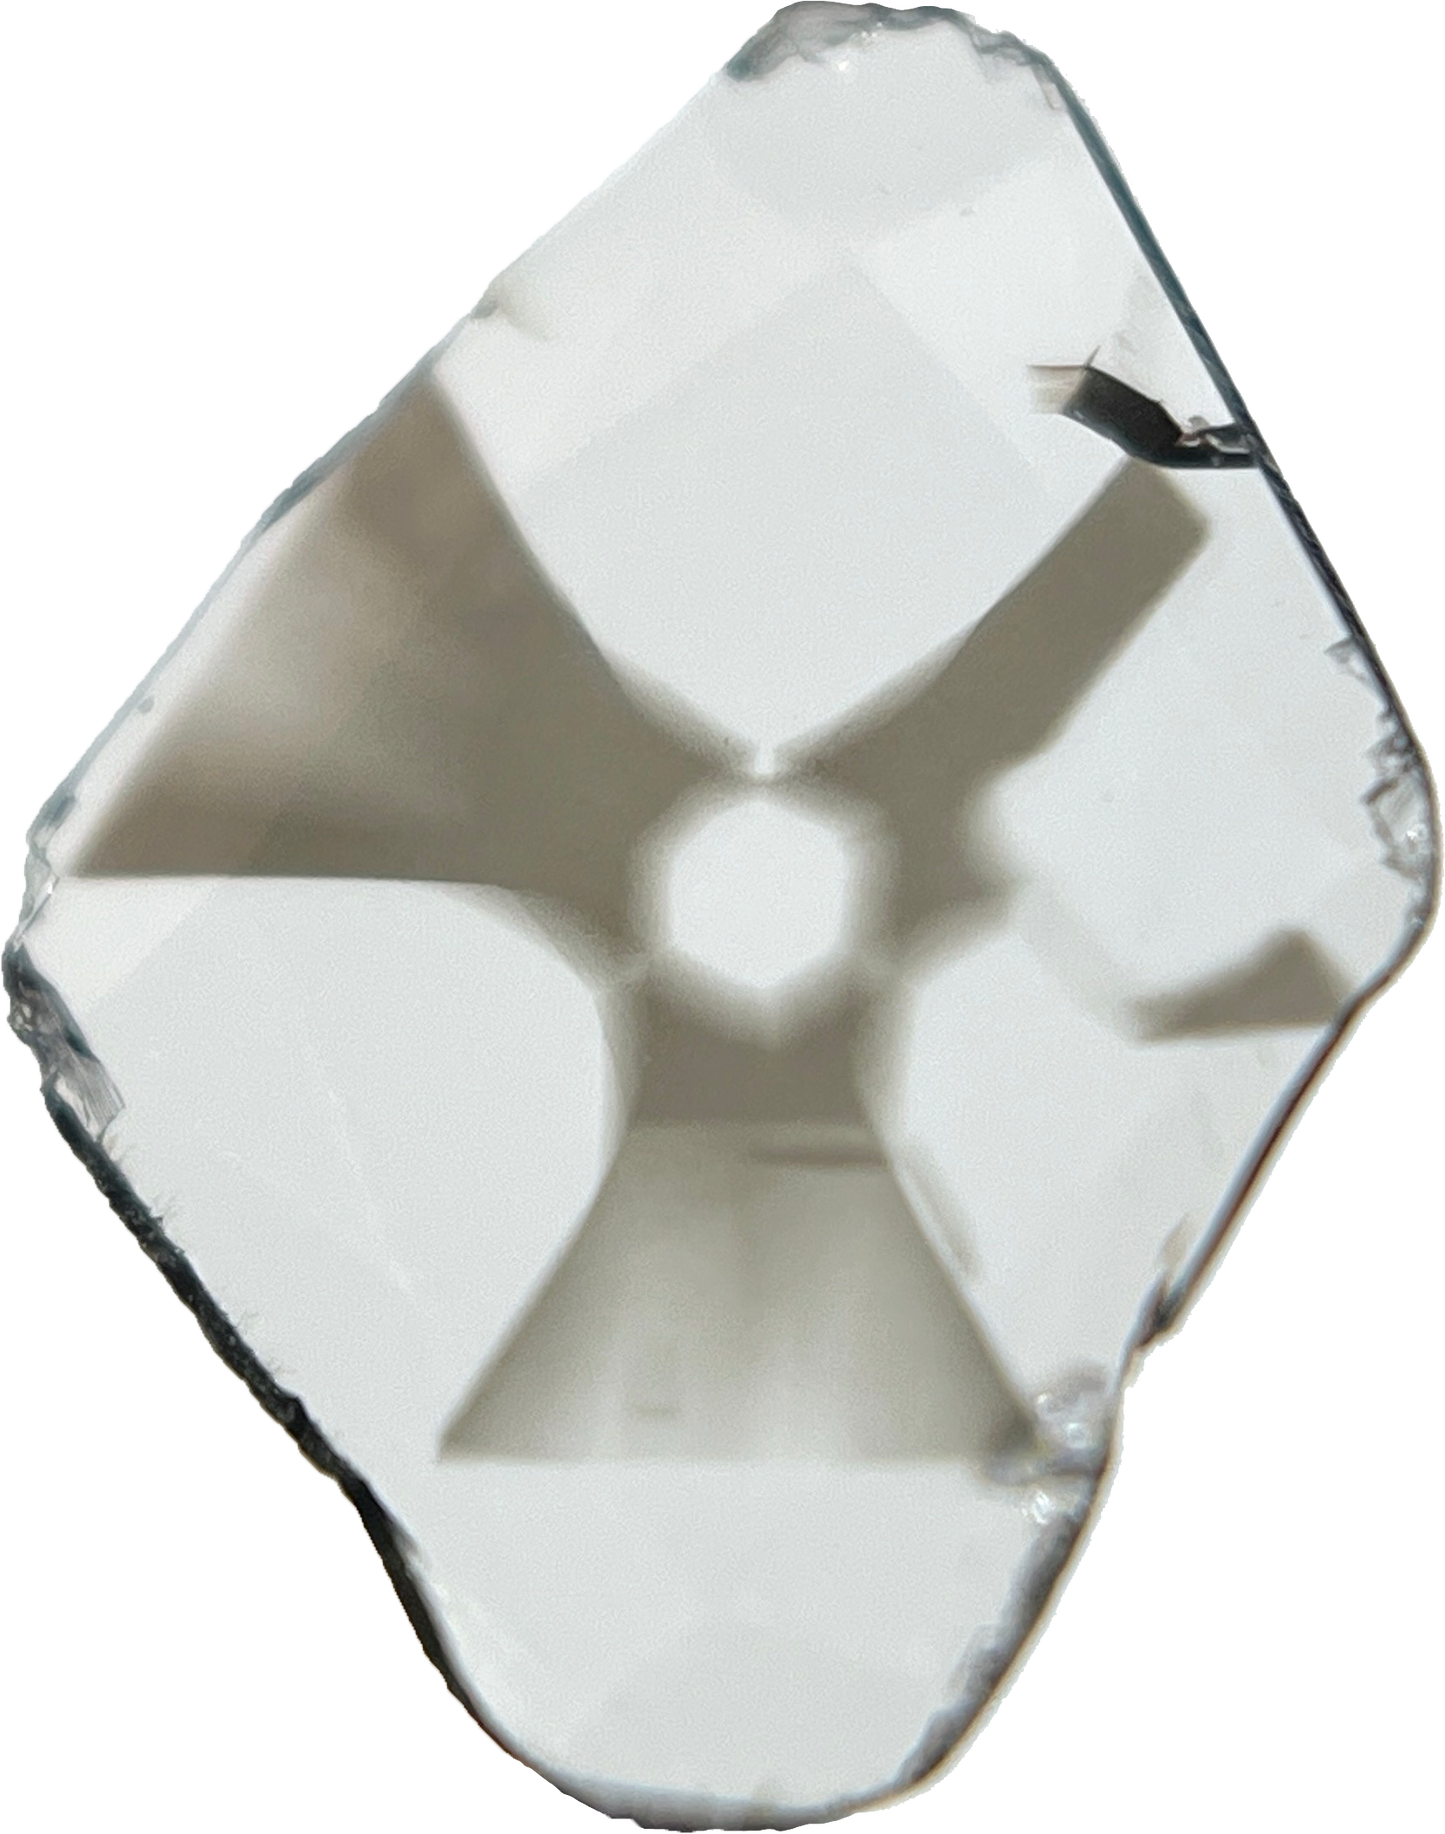 GIA 0.25 ct. Natural Fancy Gray Asteriated Diamond